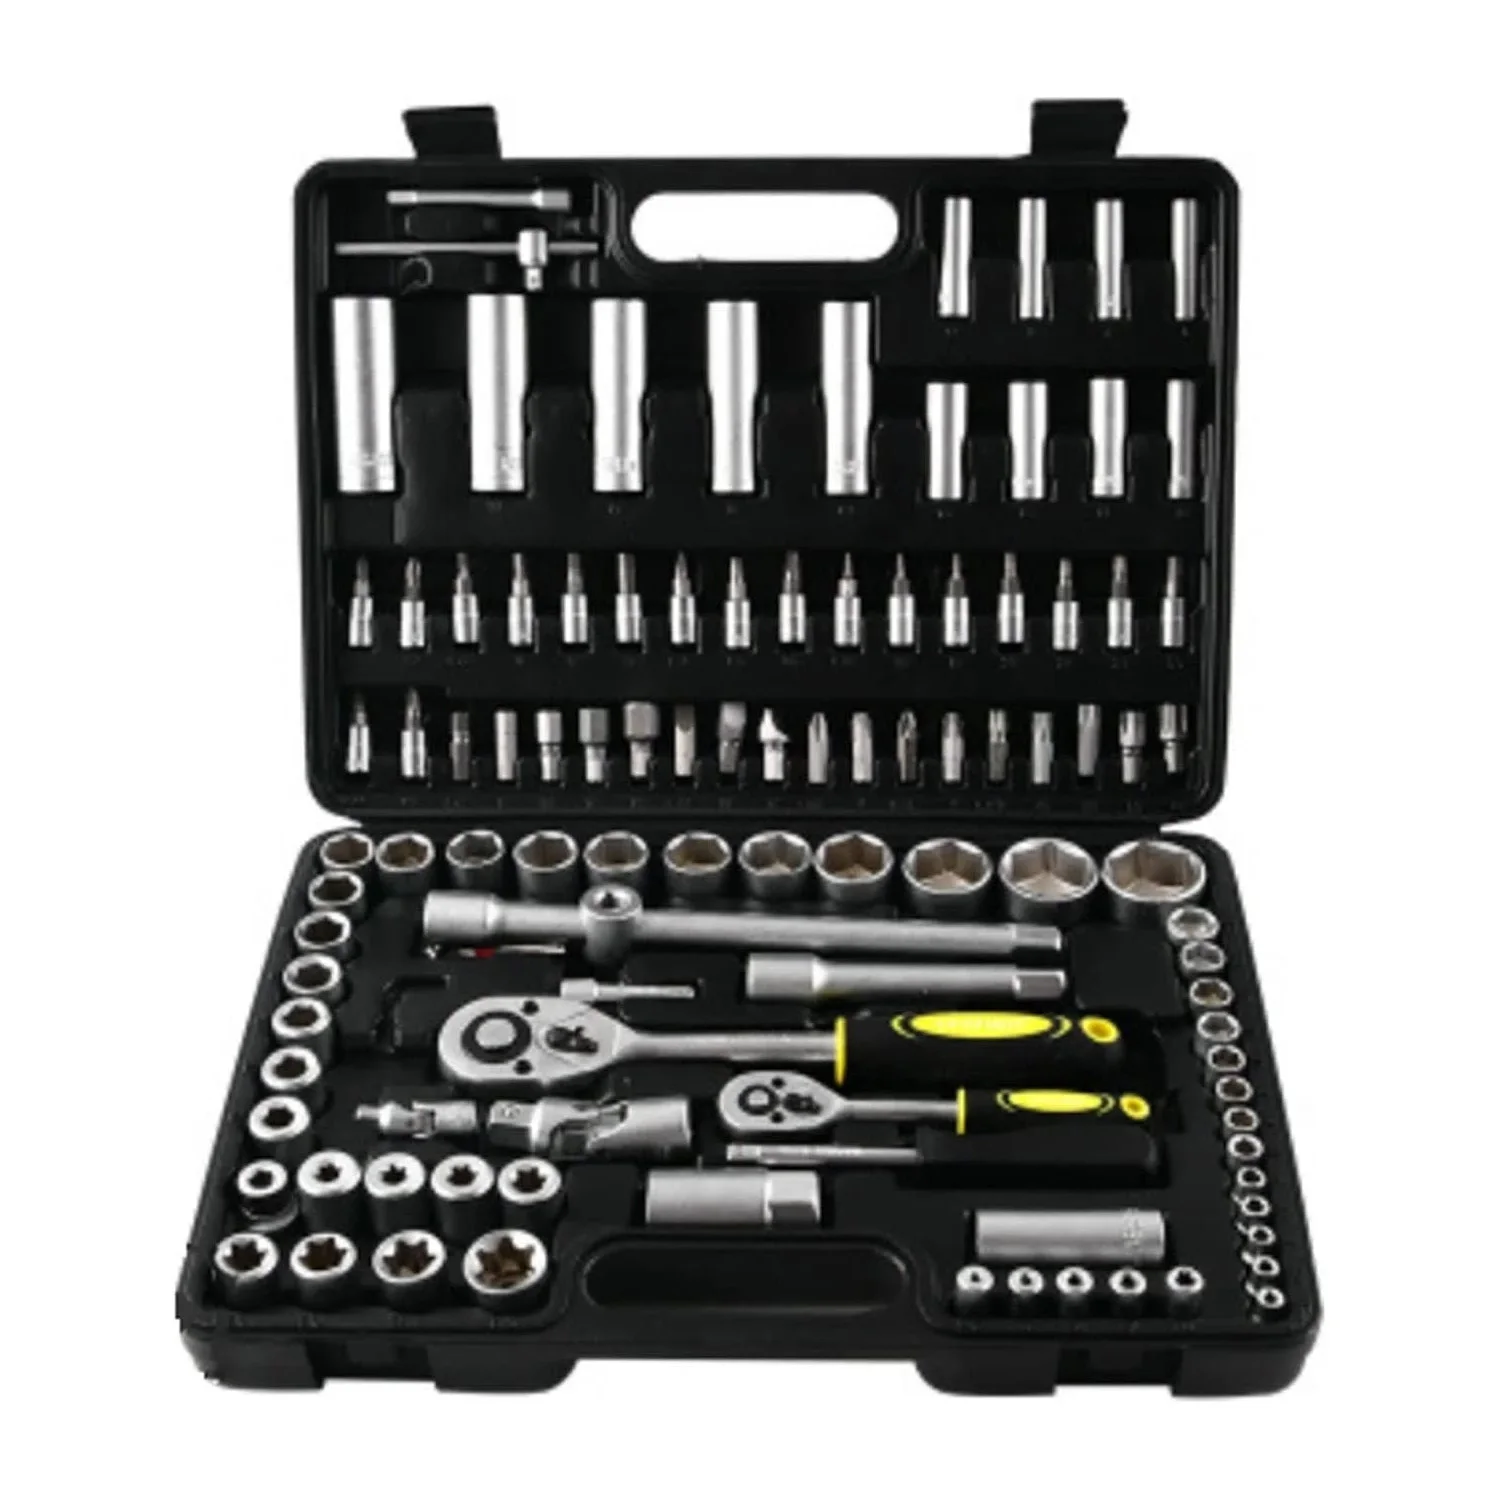 

New low price Home Tool Kit Tool Sets 108 Piece Household Hardware Socket Ratchet Handle Auto Repair Tool Combination Package